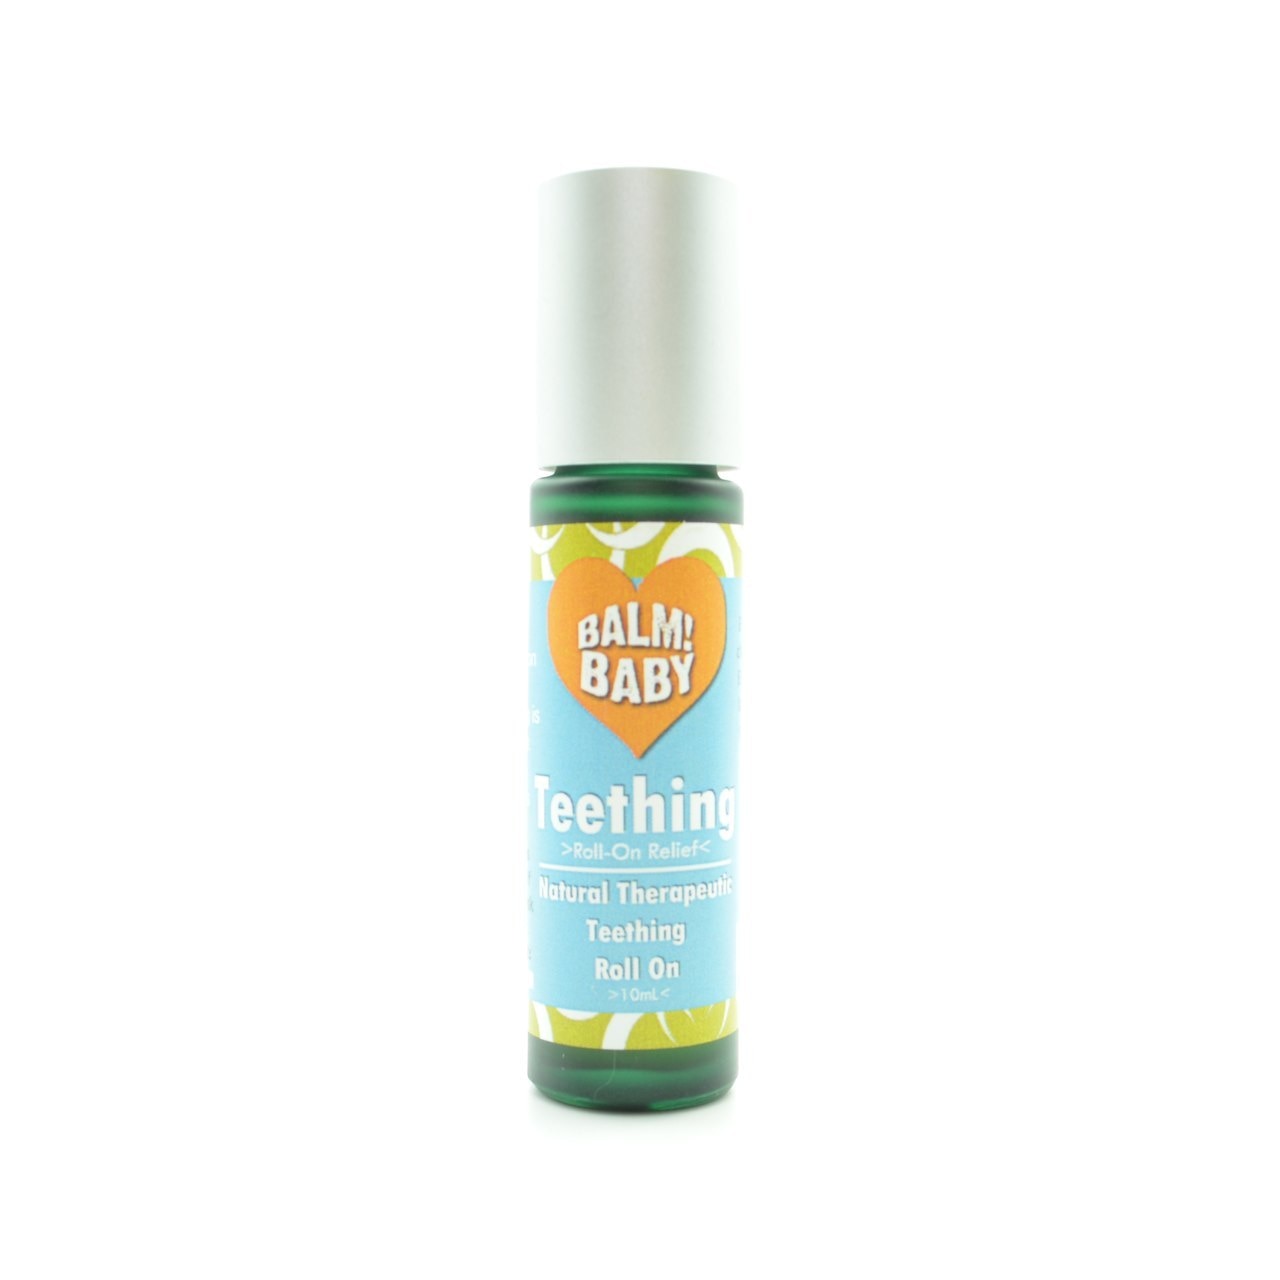 BALM! Baby – Teething ROLL-ON – A Natural Herbal TOPICAL Roll-on – 10ML